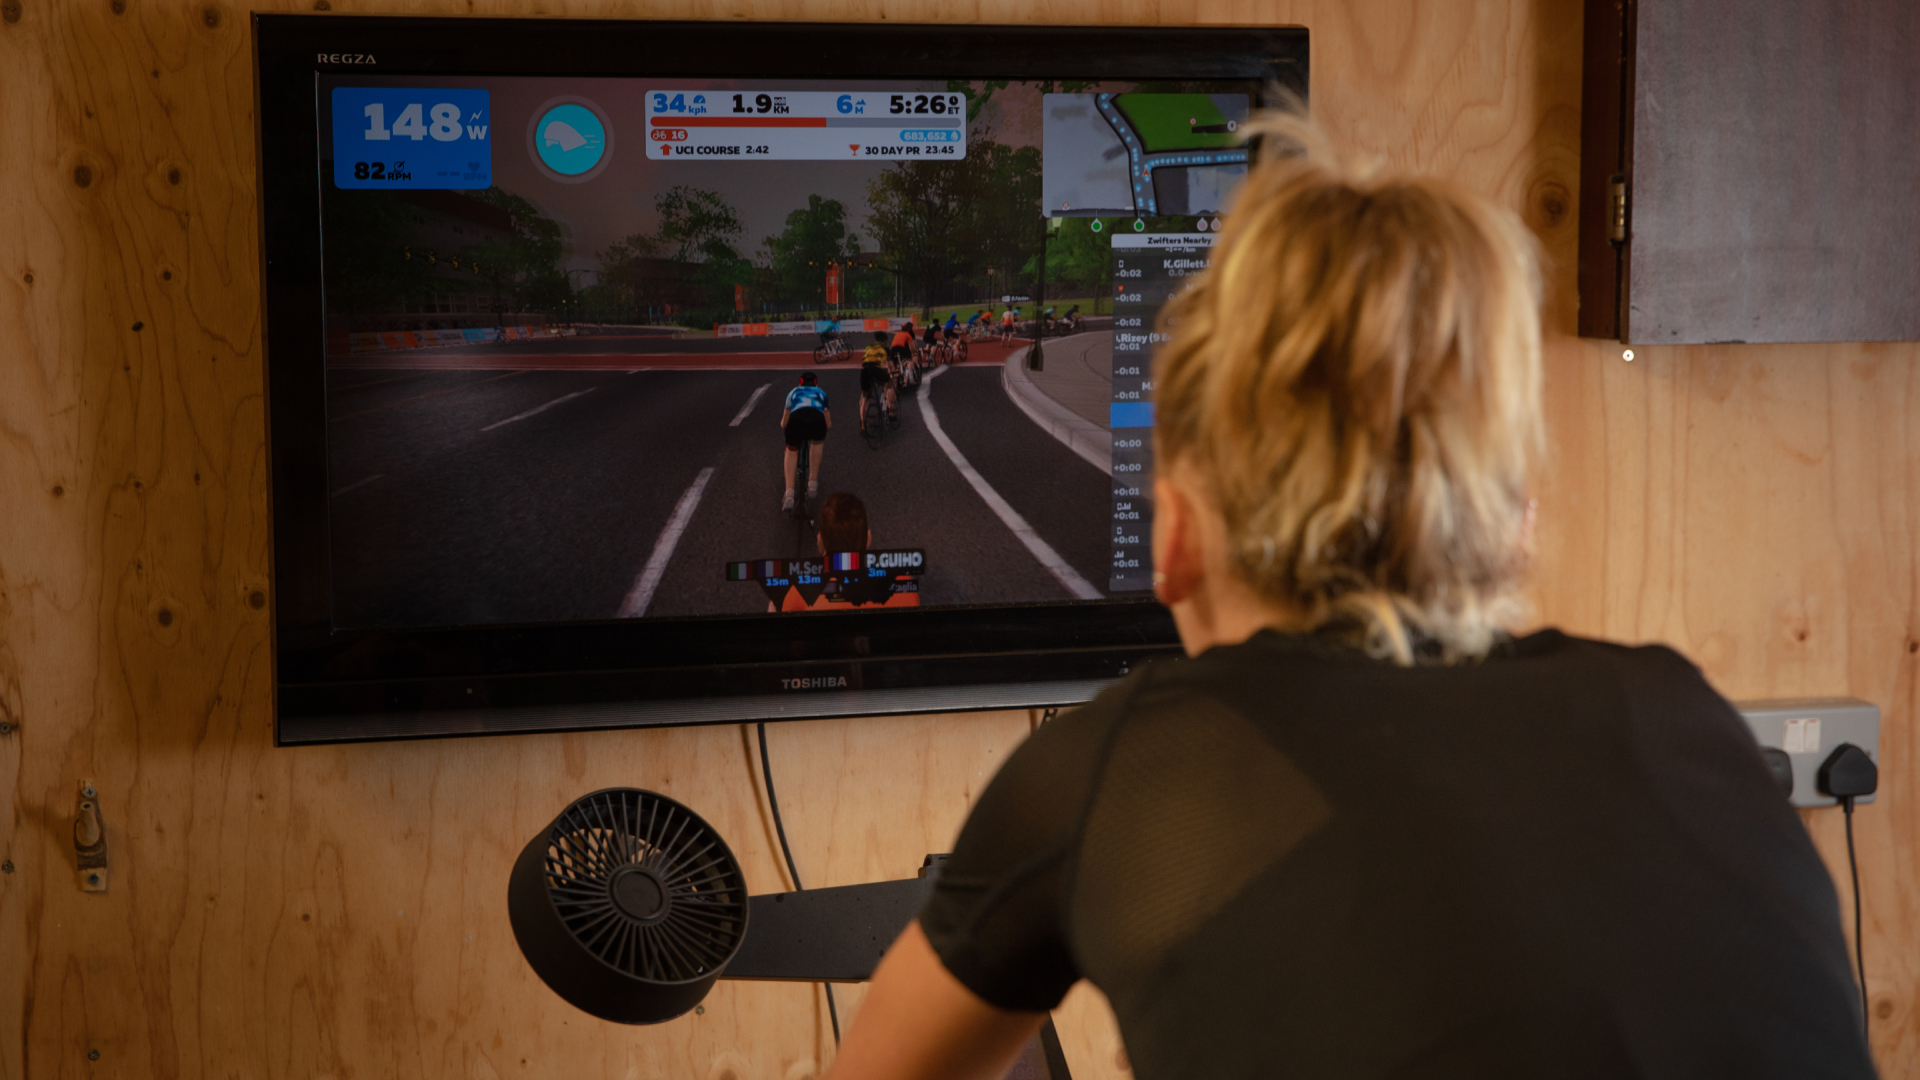 Best indoor training apps for cycling virtual riding platforms and training analysis apps Cycling Weekly